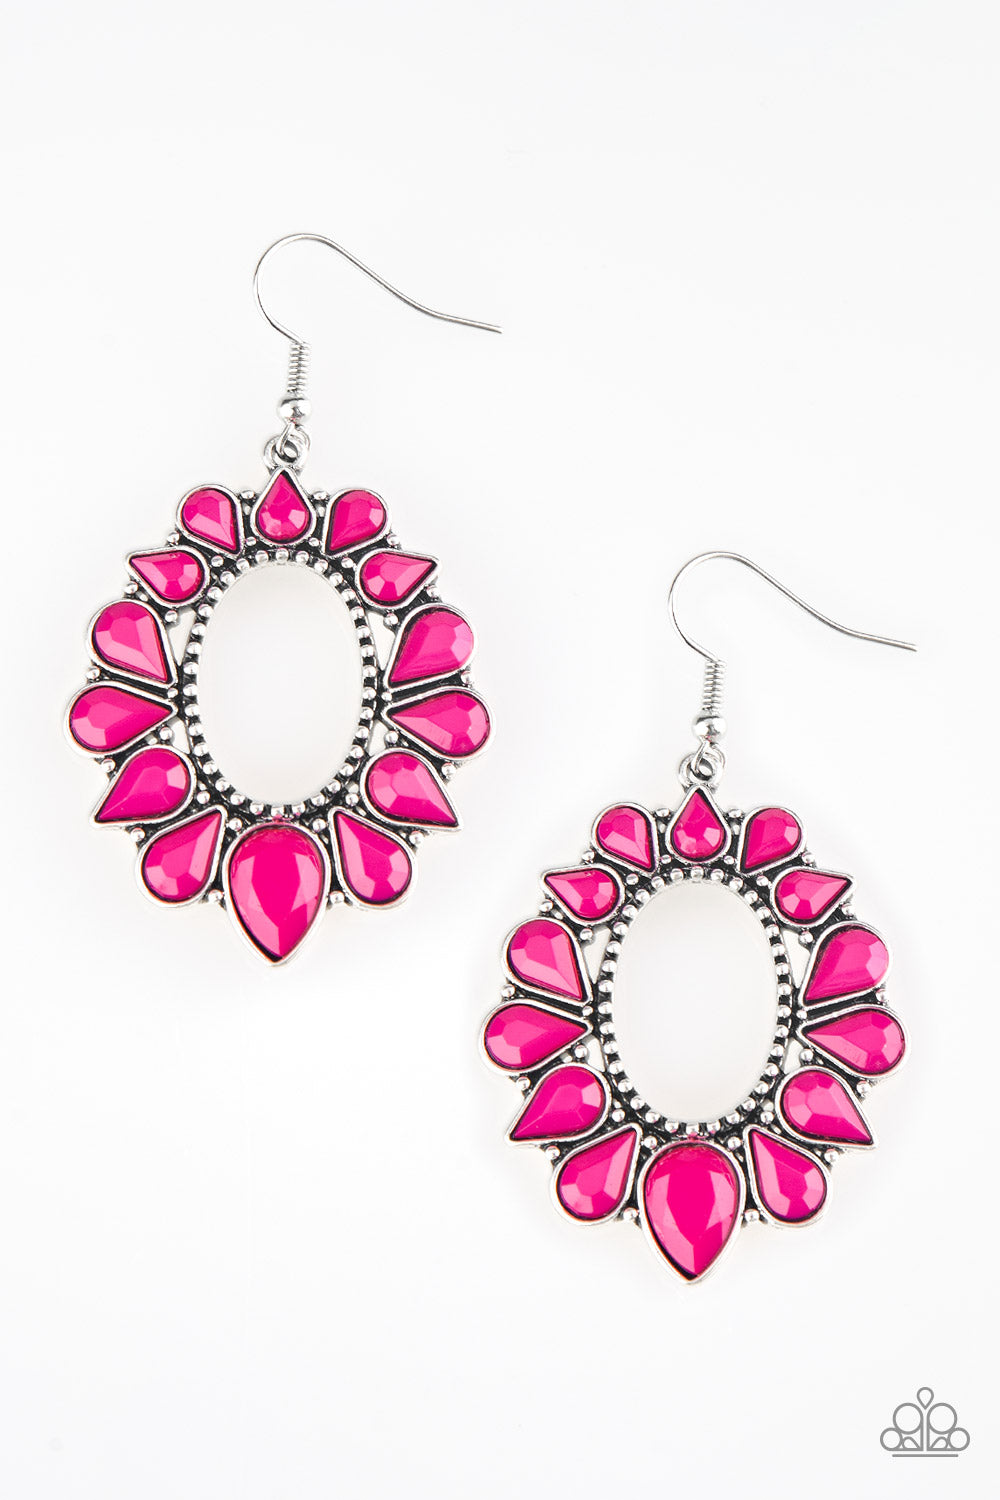 Fashionista Flavor Pink Paparazzi Earrings Cashmere Pink Jewels - Cashmere Pink Jewels & Accessories, Cashmere Pink Jewels & Accessories - Paparazzi